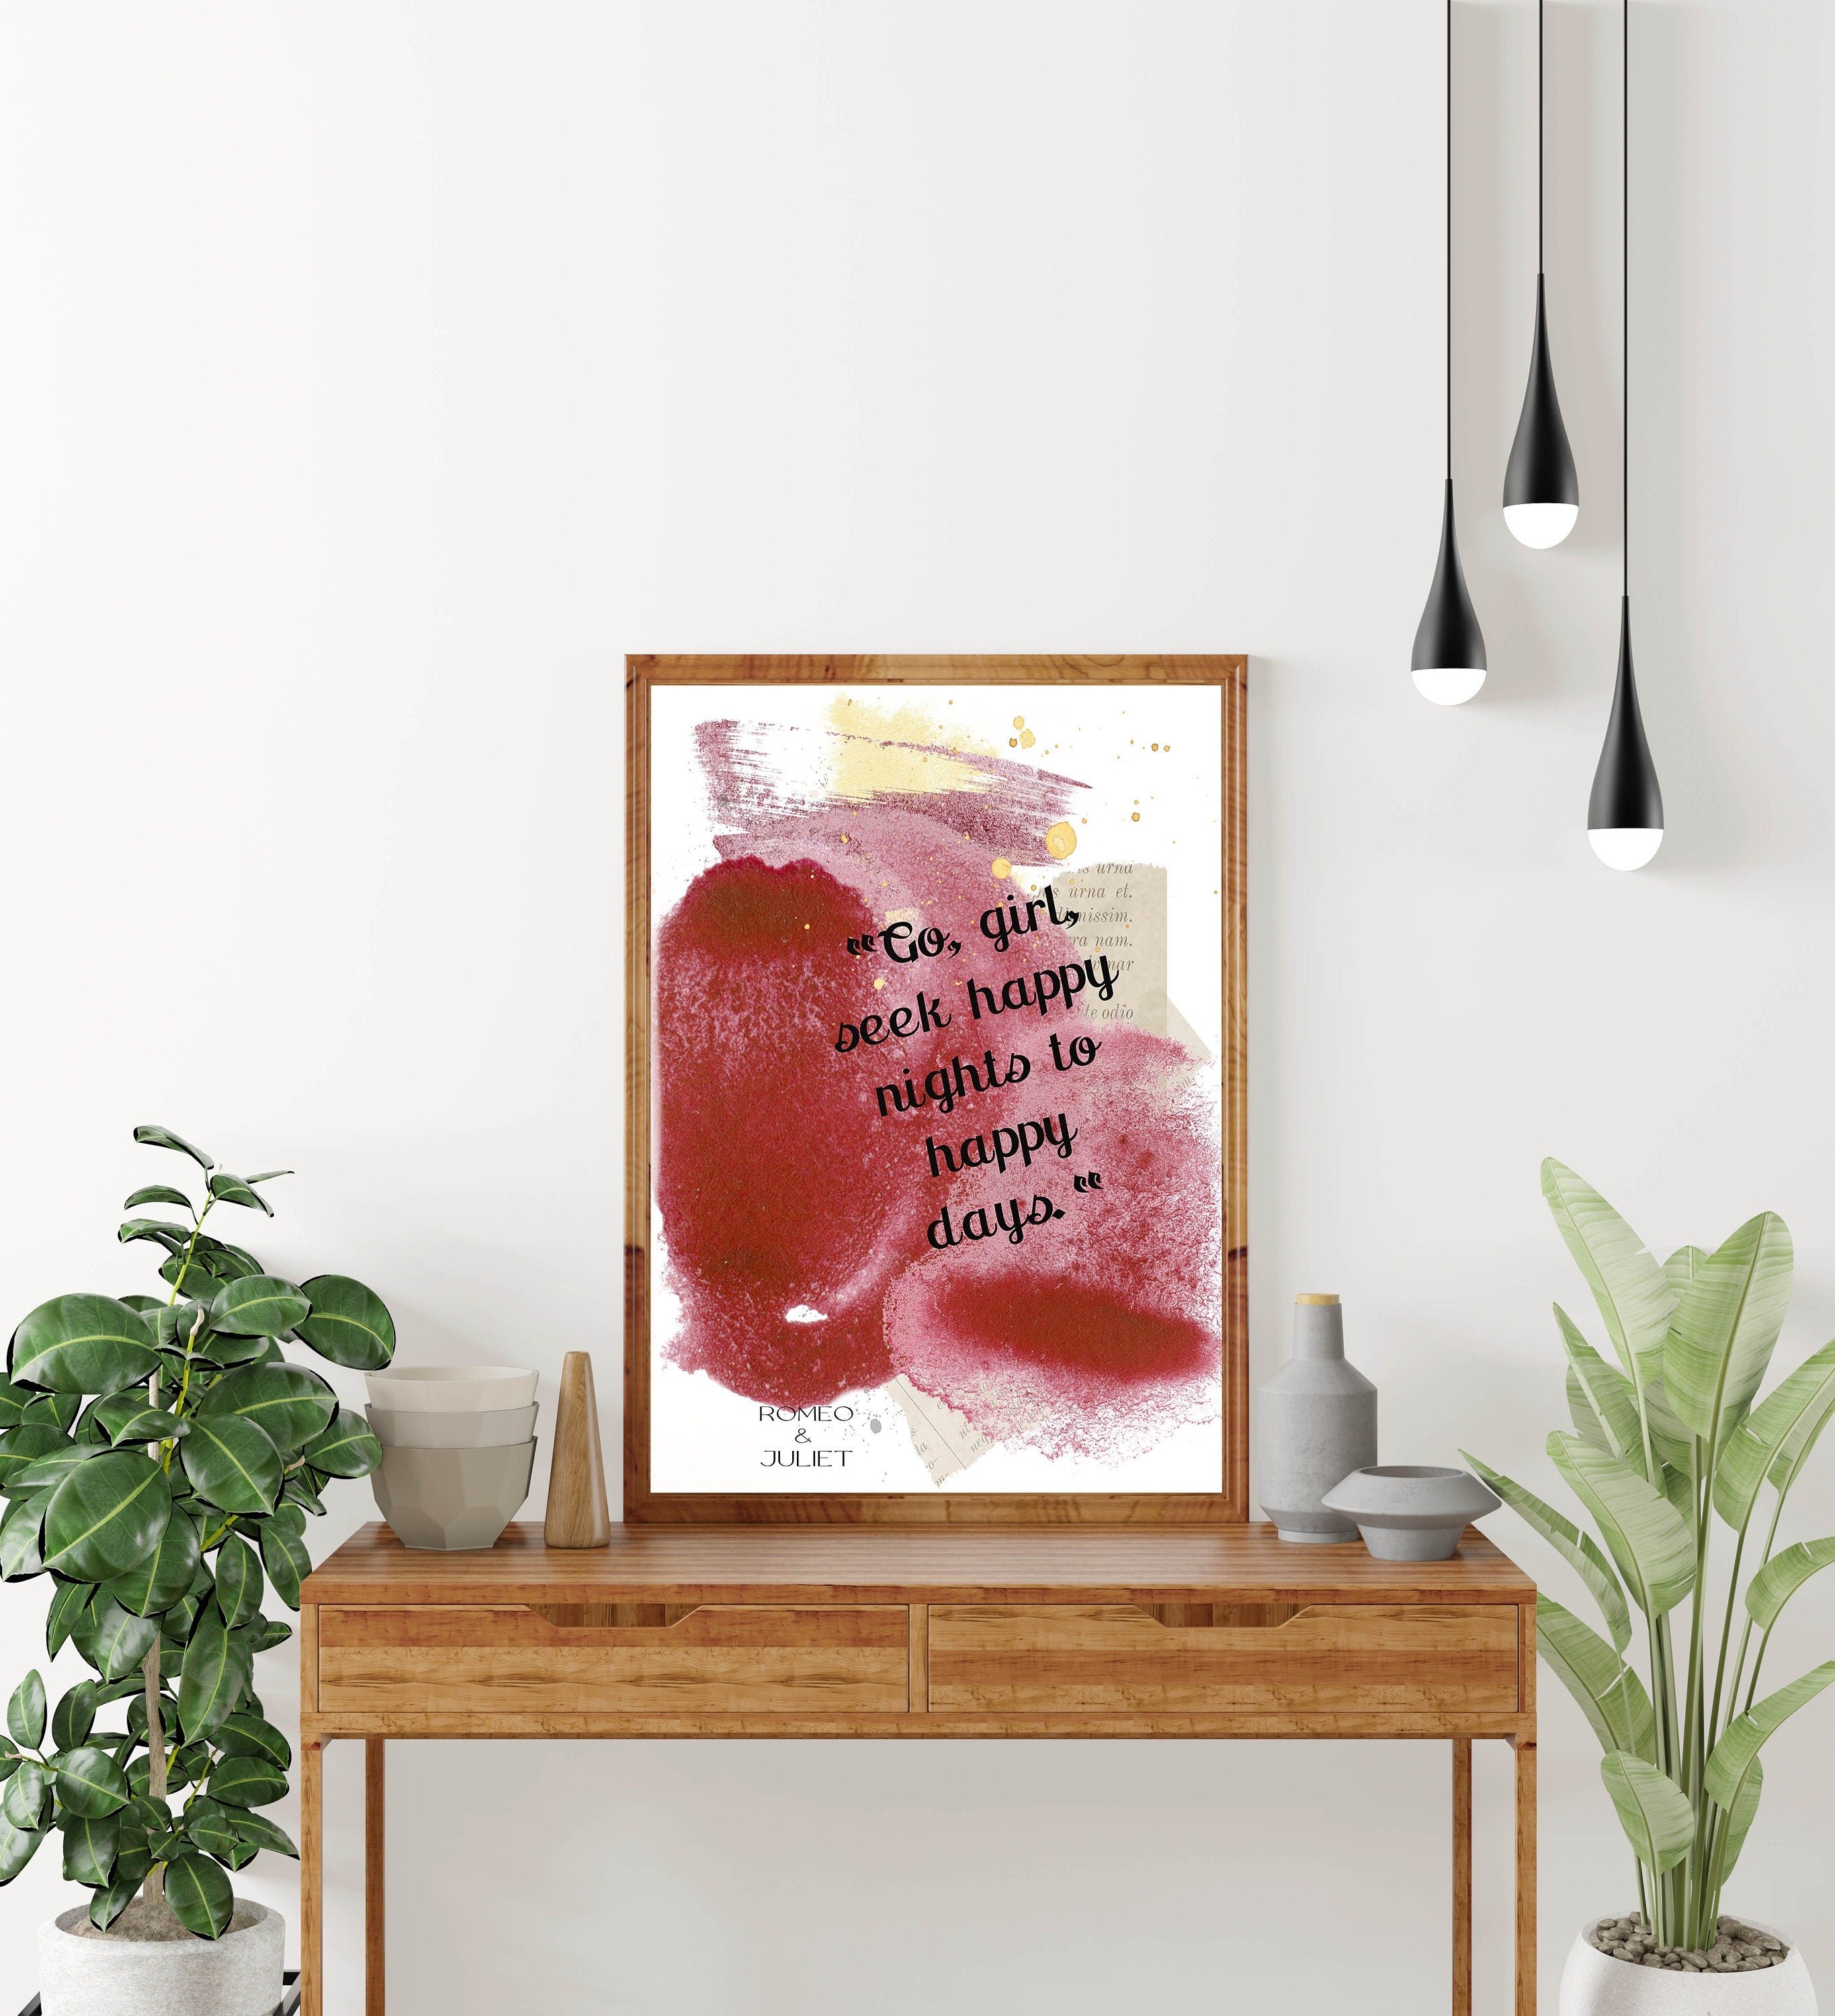 Romeo & Juliet Quote Print Go Girl Seek Happy Nights, William Shakespeare Romantic Quote Wall Art Prints Framed or Unframed